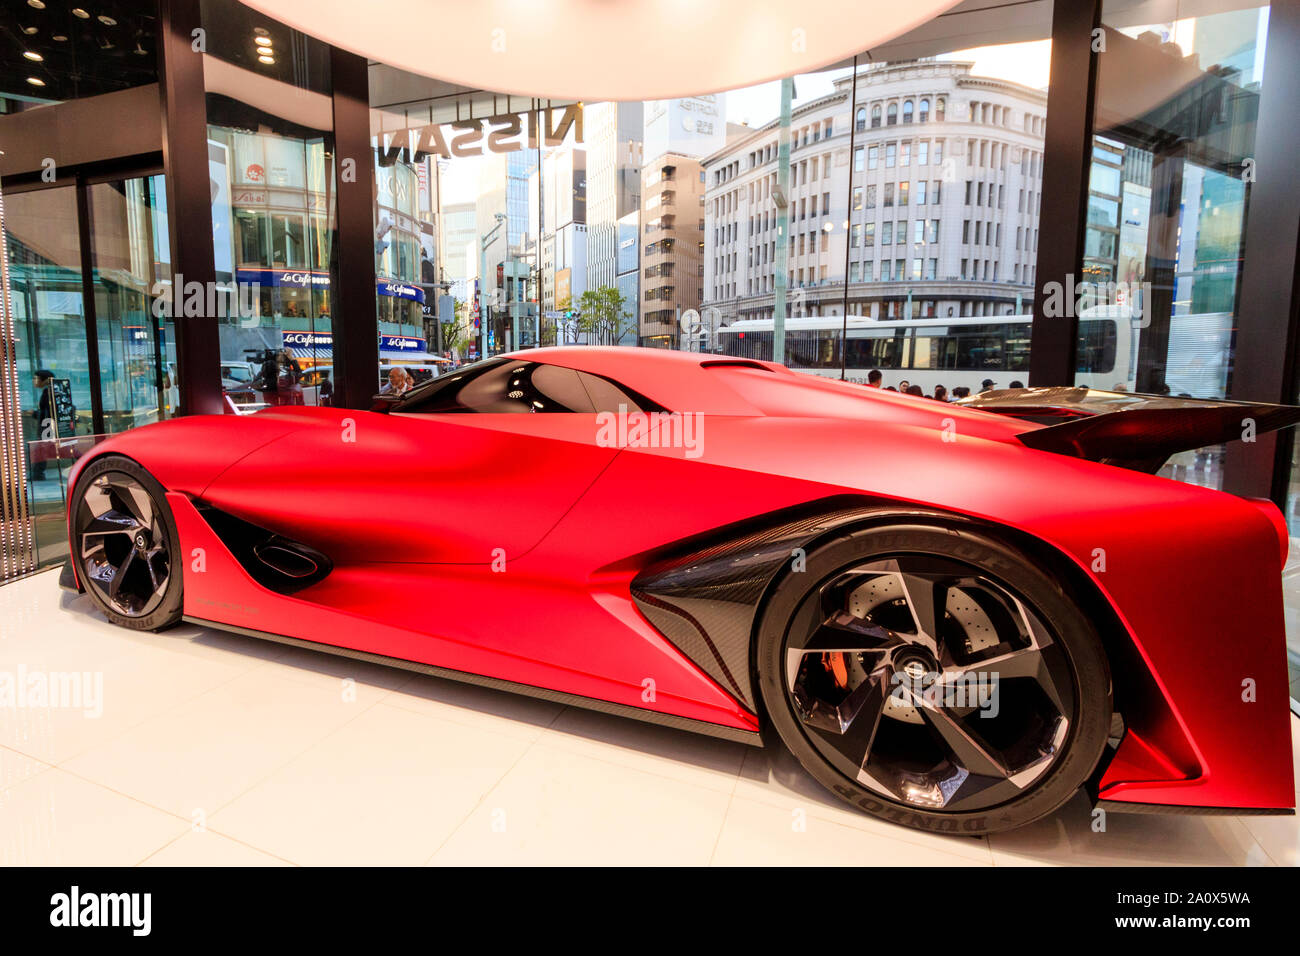 Nissan flagship showroom, Ginza, Tokyo. Display of the concept 2020 Granturismo car, on a revolving platform at glass fronted corner of building. Stock Photo